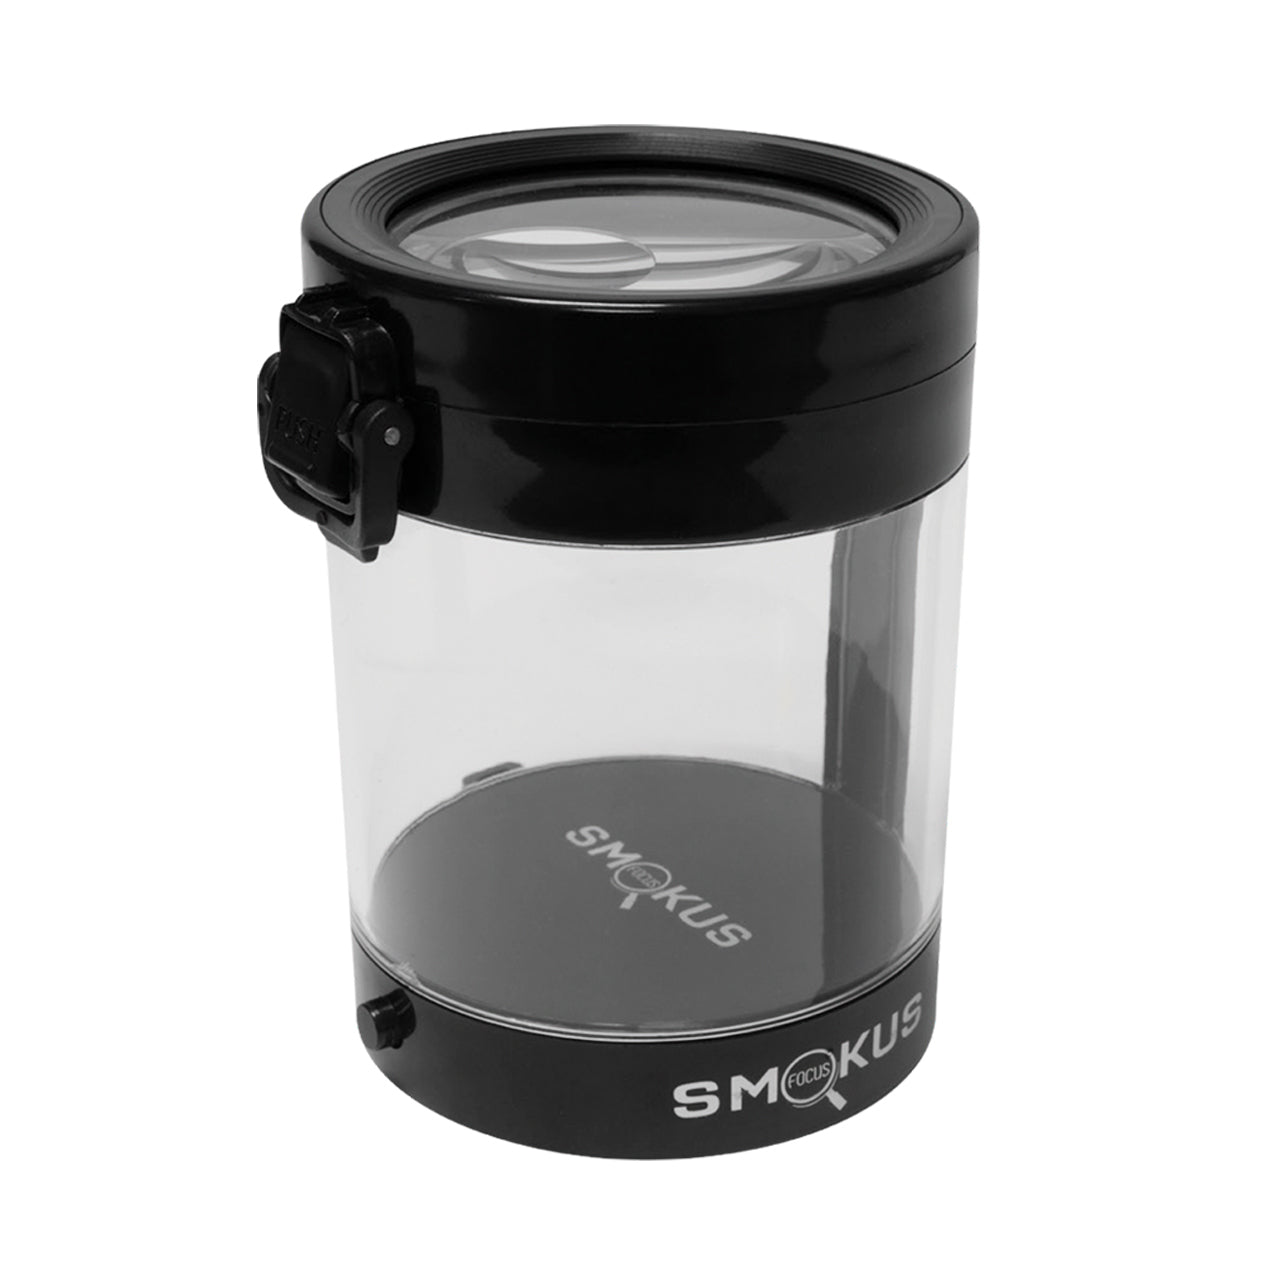 Small Glass Stash Jar with 5x Magnifying Lid